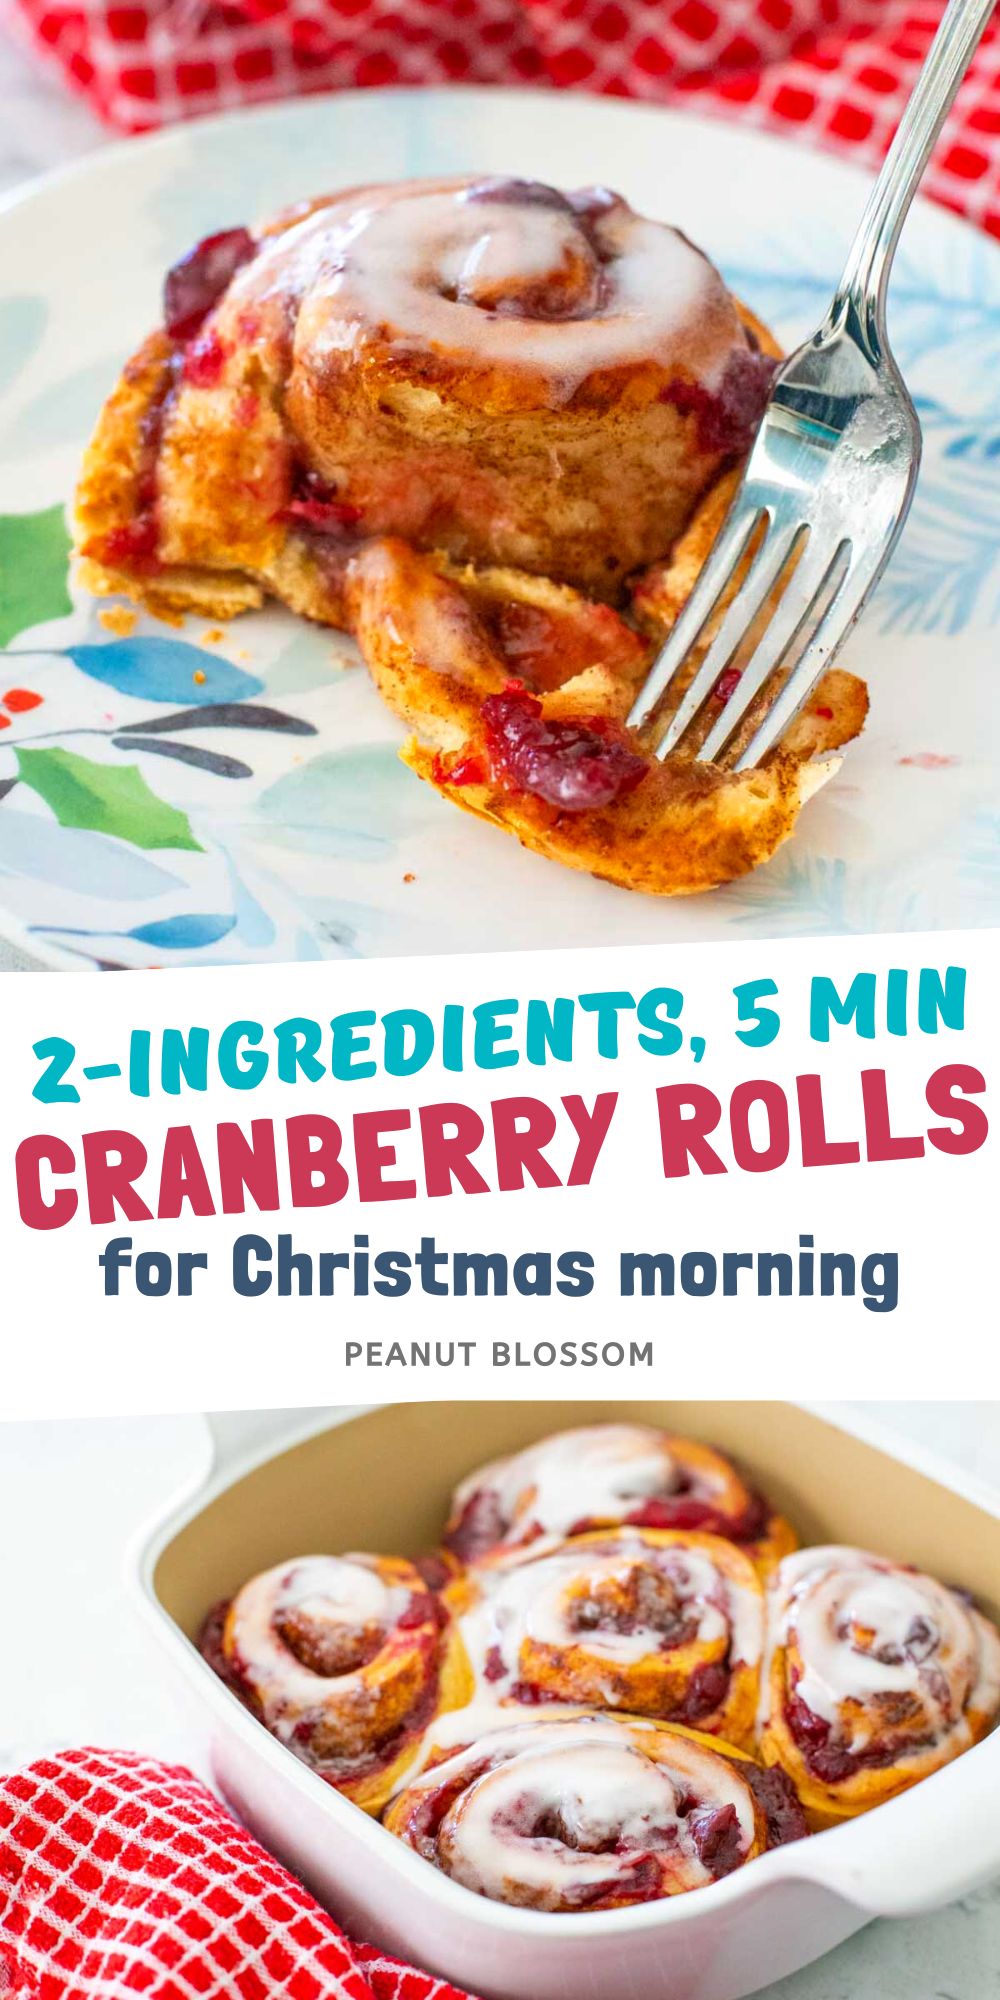 The Pillsbury cinnamon rolls have been used to make cranberry rolls for Christmas morning.